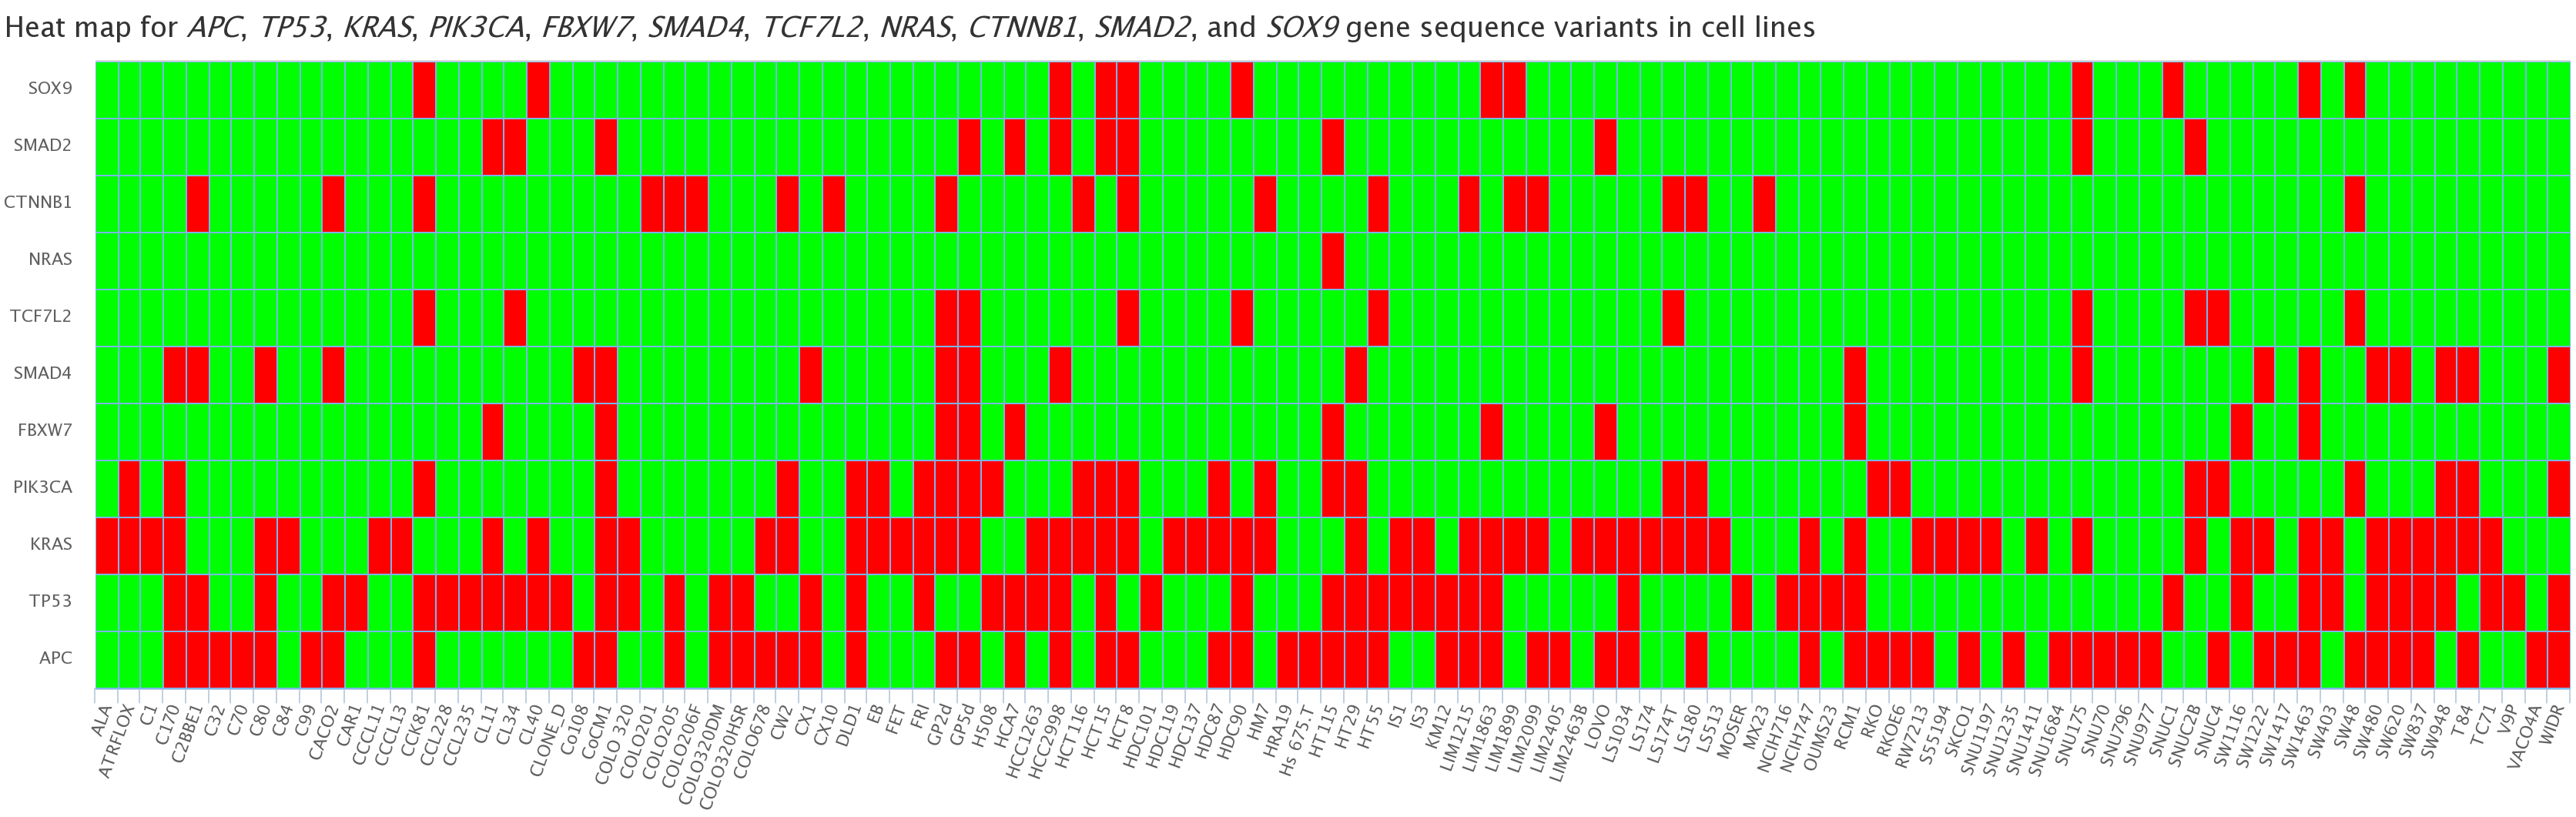 Heat map showing the presence or absence of gene sequence variants in cell lines 